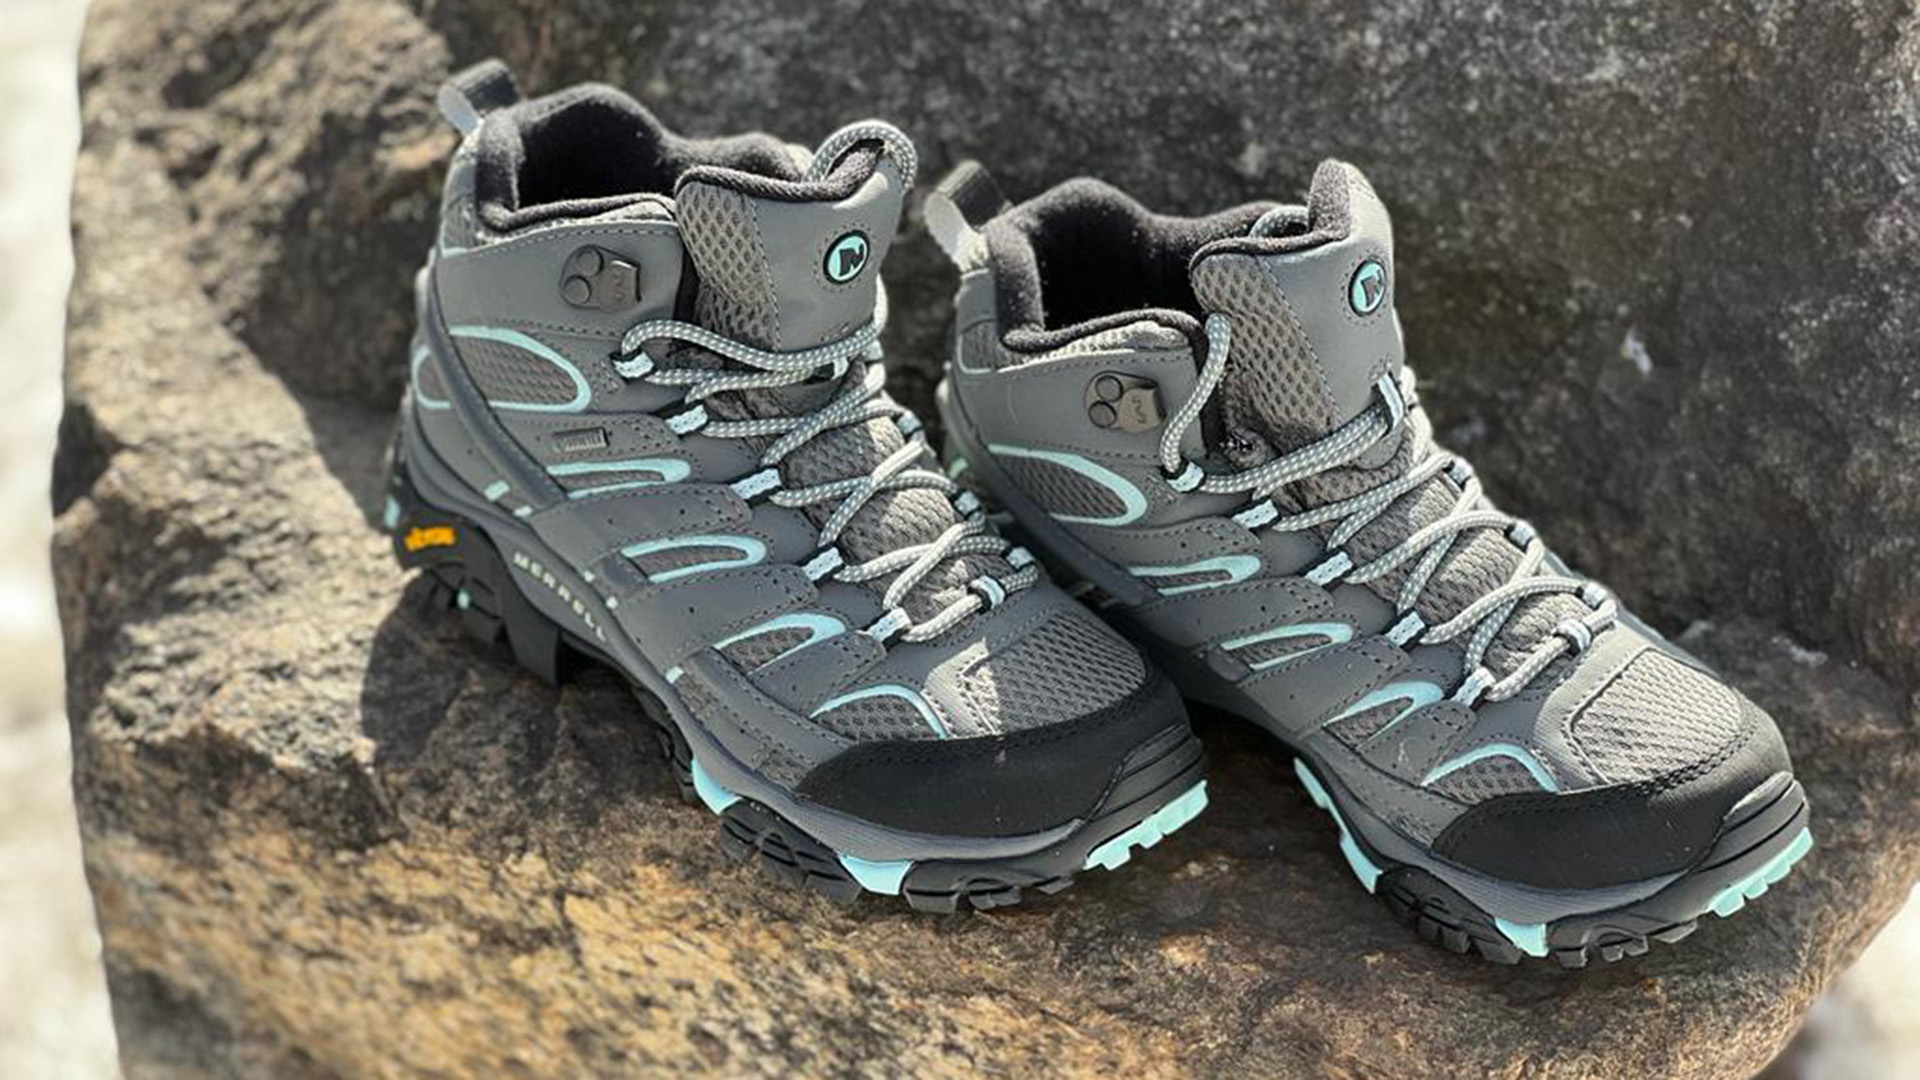 Merrell Women's Moab 2 Mid Gore-Tex review: all-rounder high-comfort hiking boot |